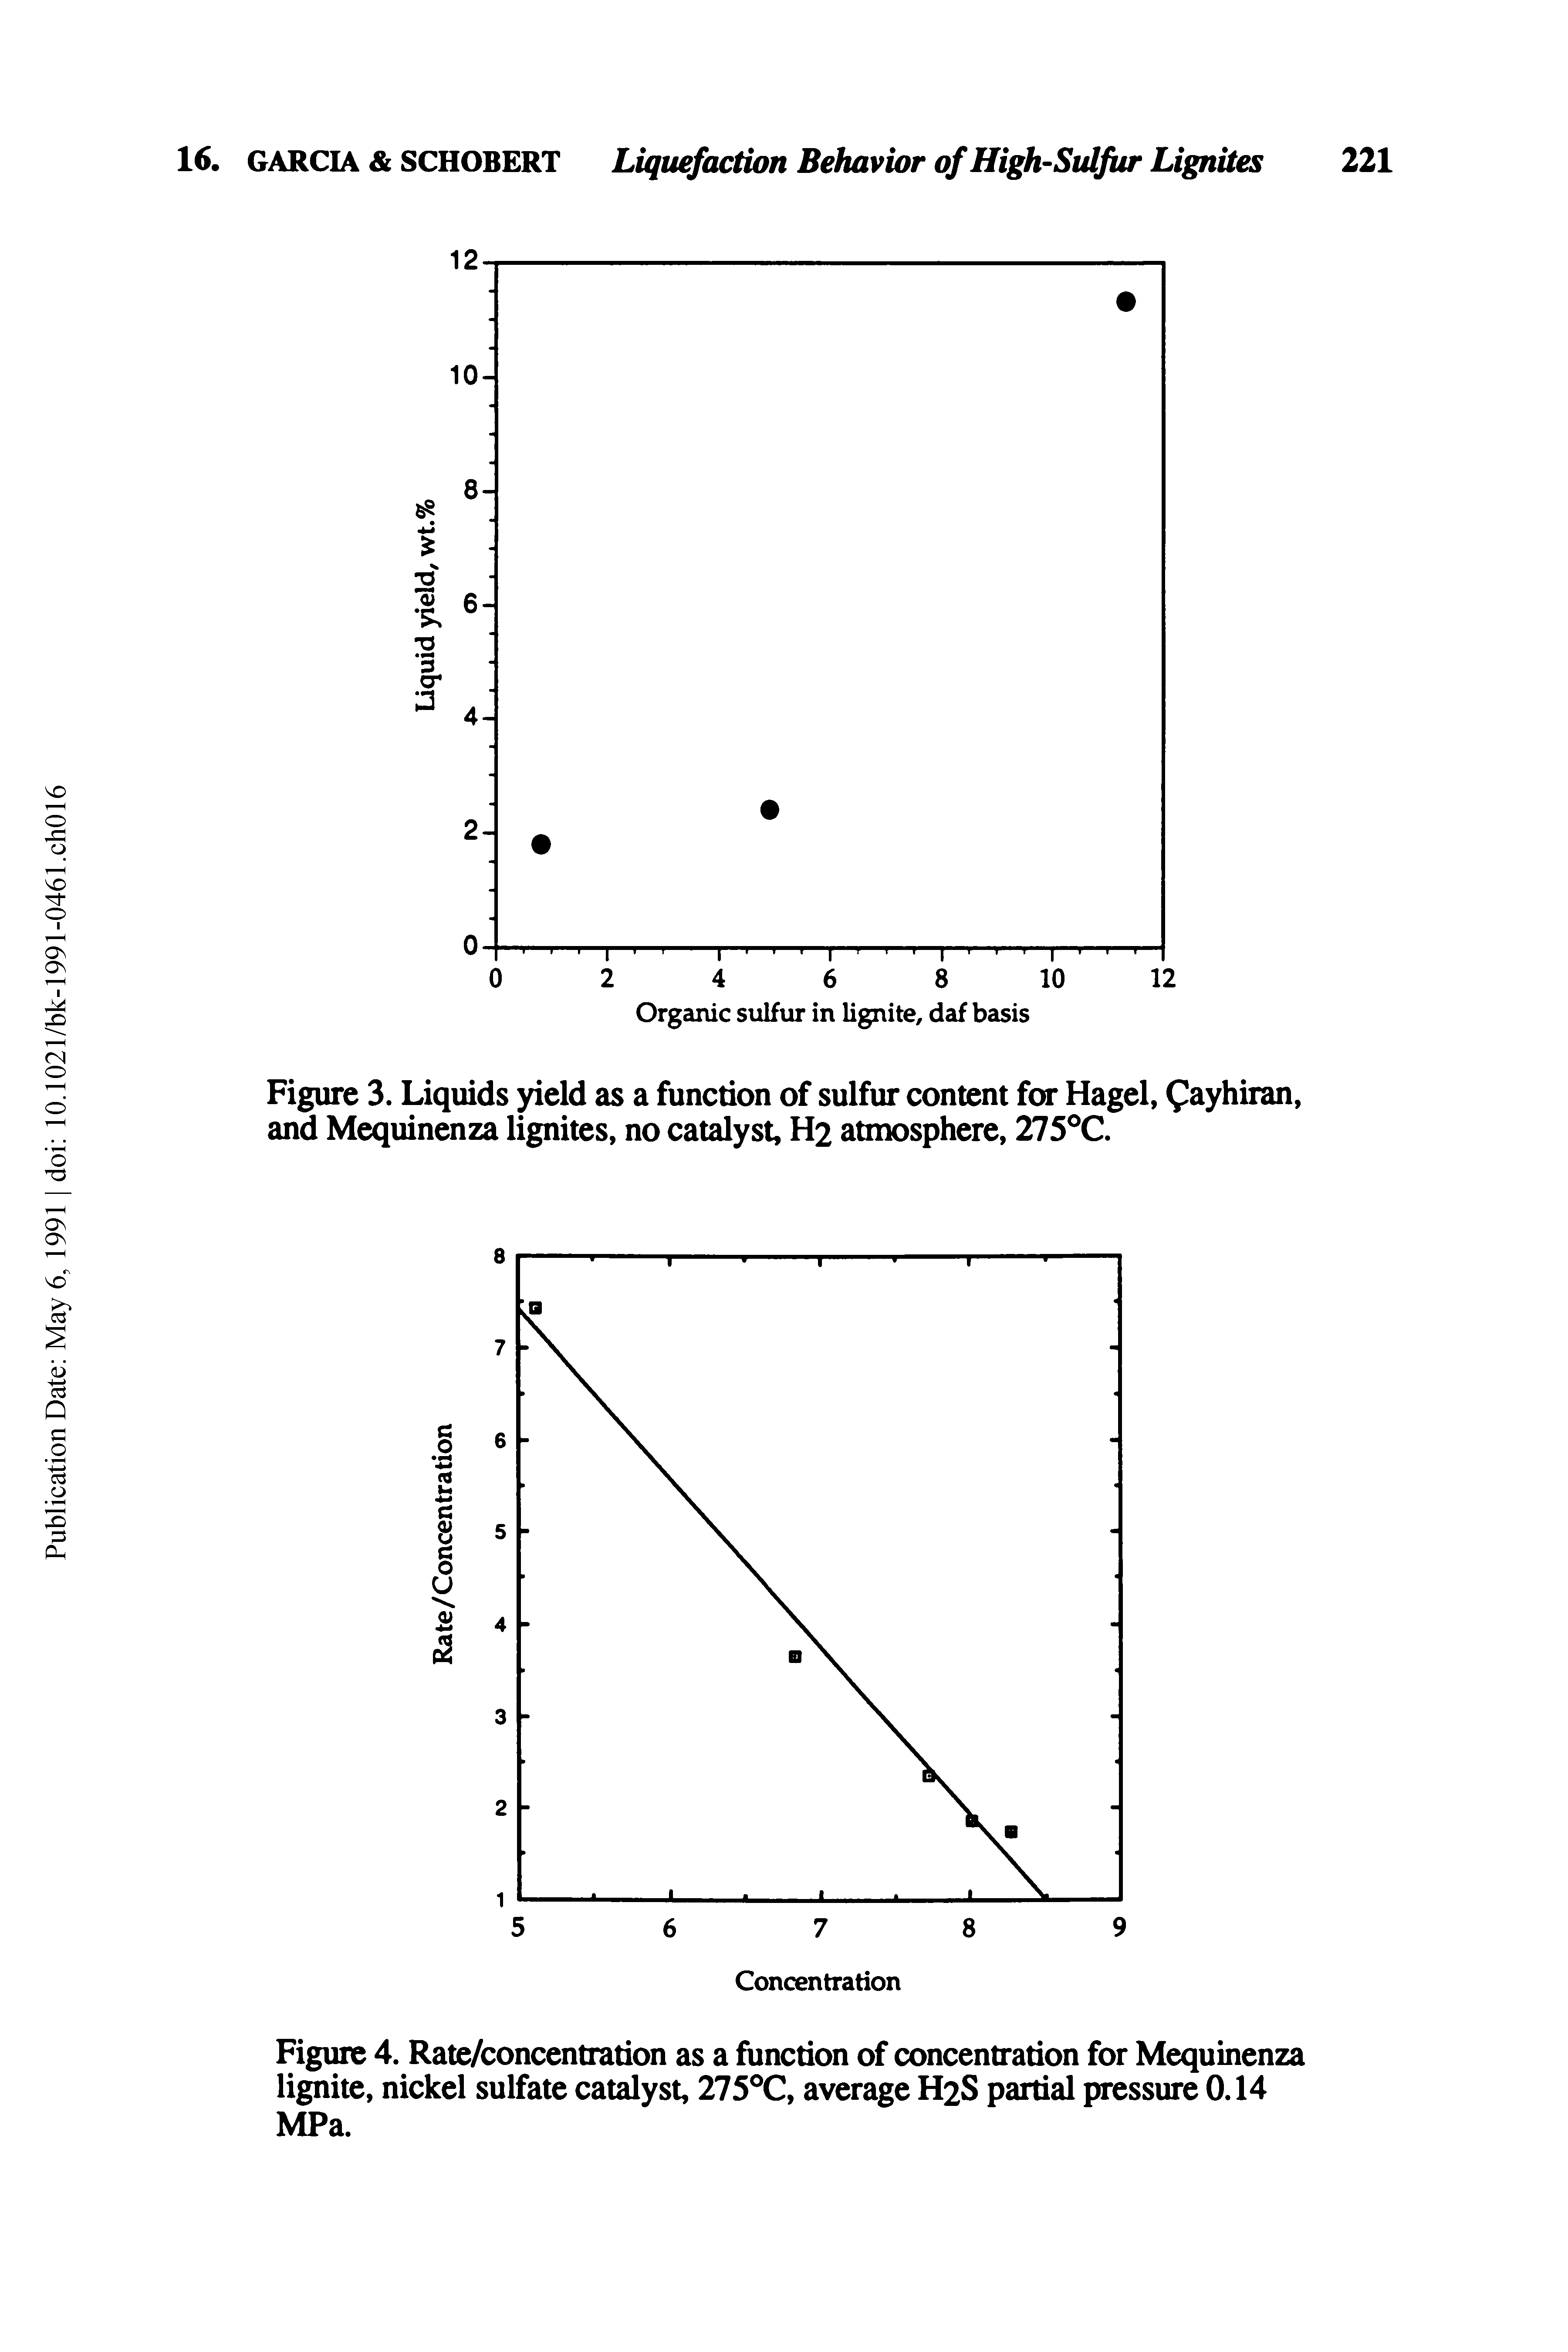 Figure 3. Liquids yield as a function of sulfur content for Hagel, ayhiran, and Mequinenza lignites, no catalyst, H2 atmosphere, 275 C.